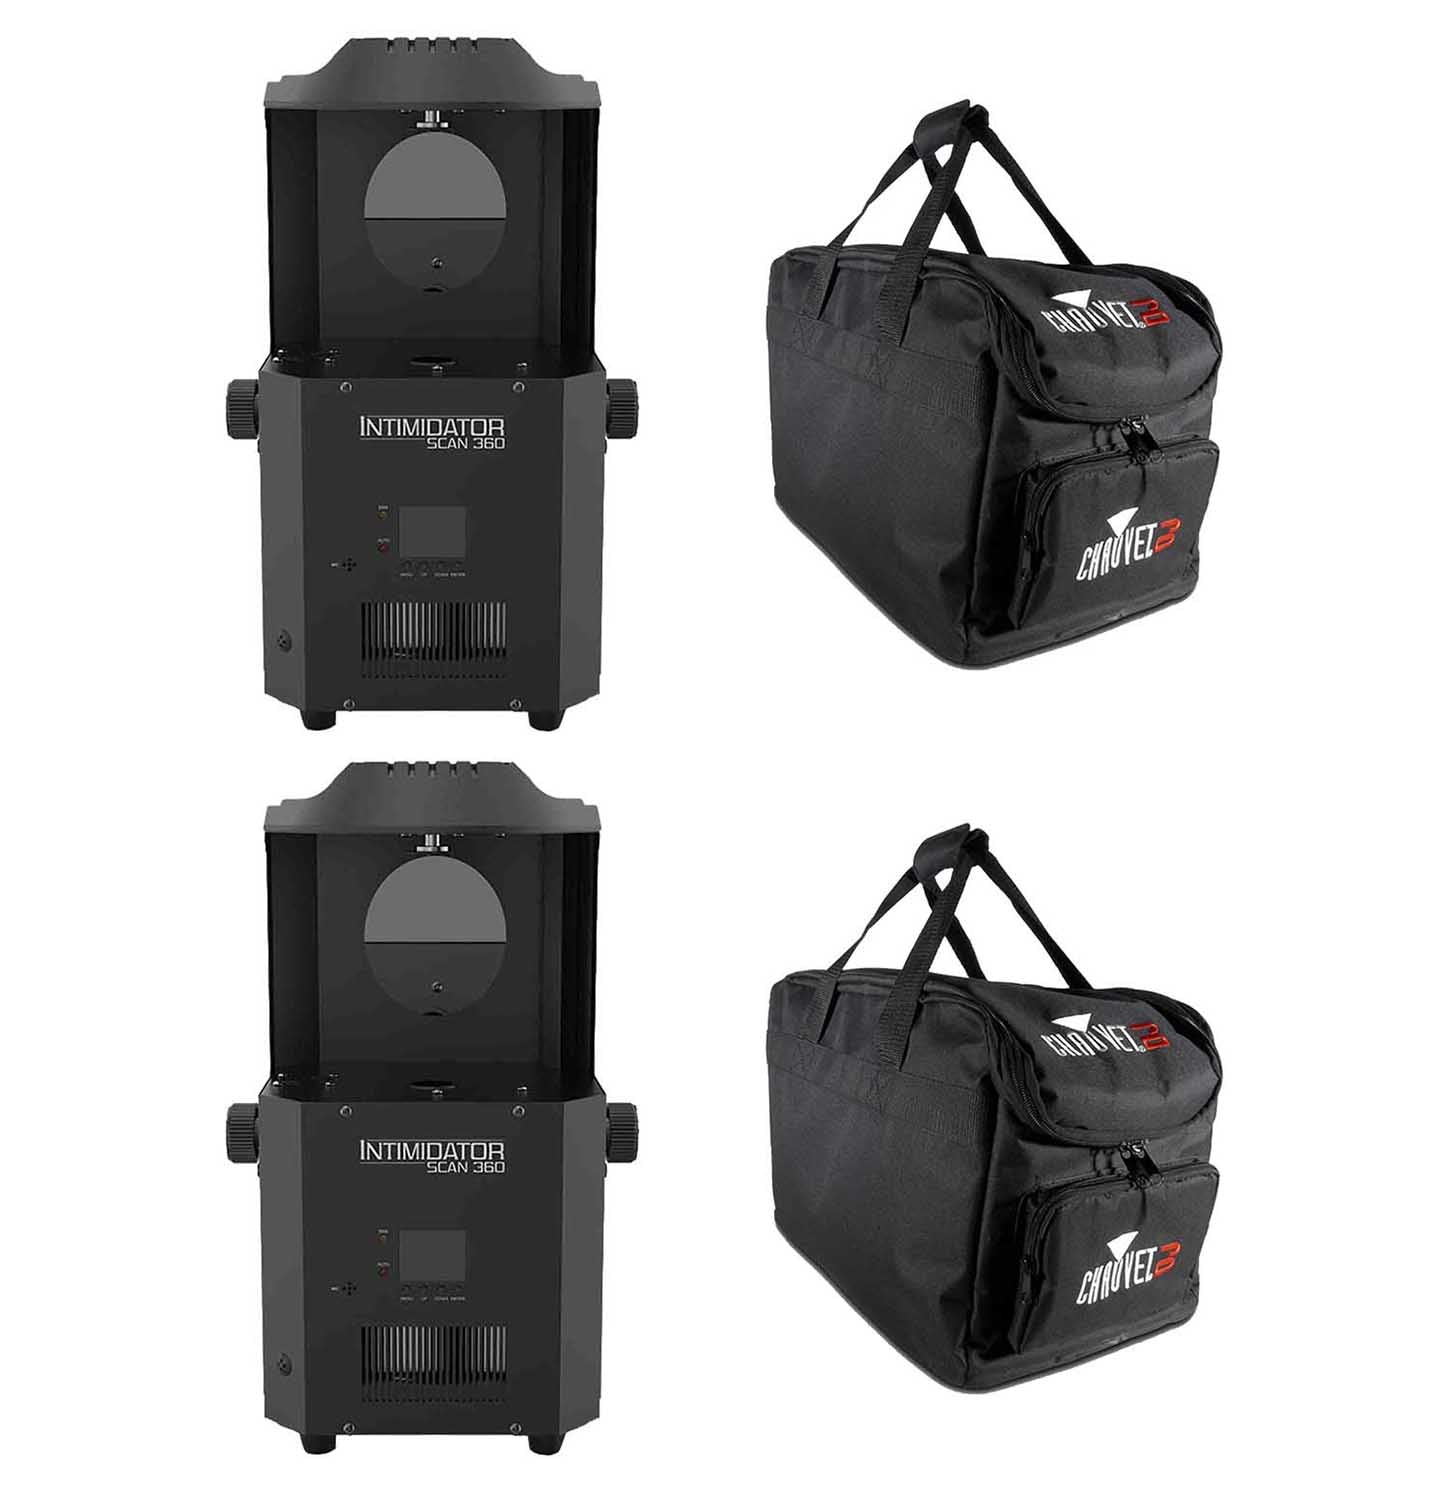 Chauvet DJ Package with 2 Intimidator Scan 360 LED Scanner and 2 CHS-30 VIP Gear Bag - Hollywood DJ